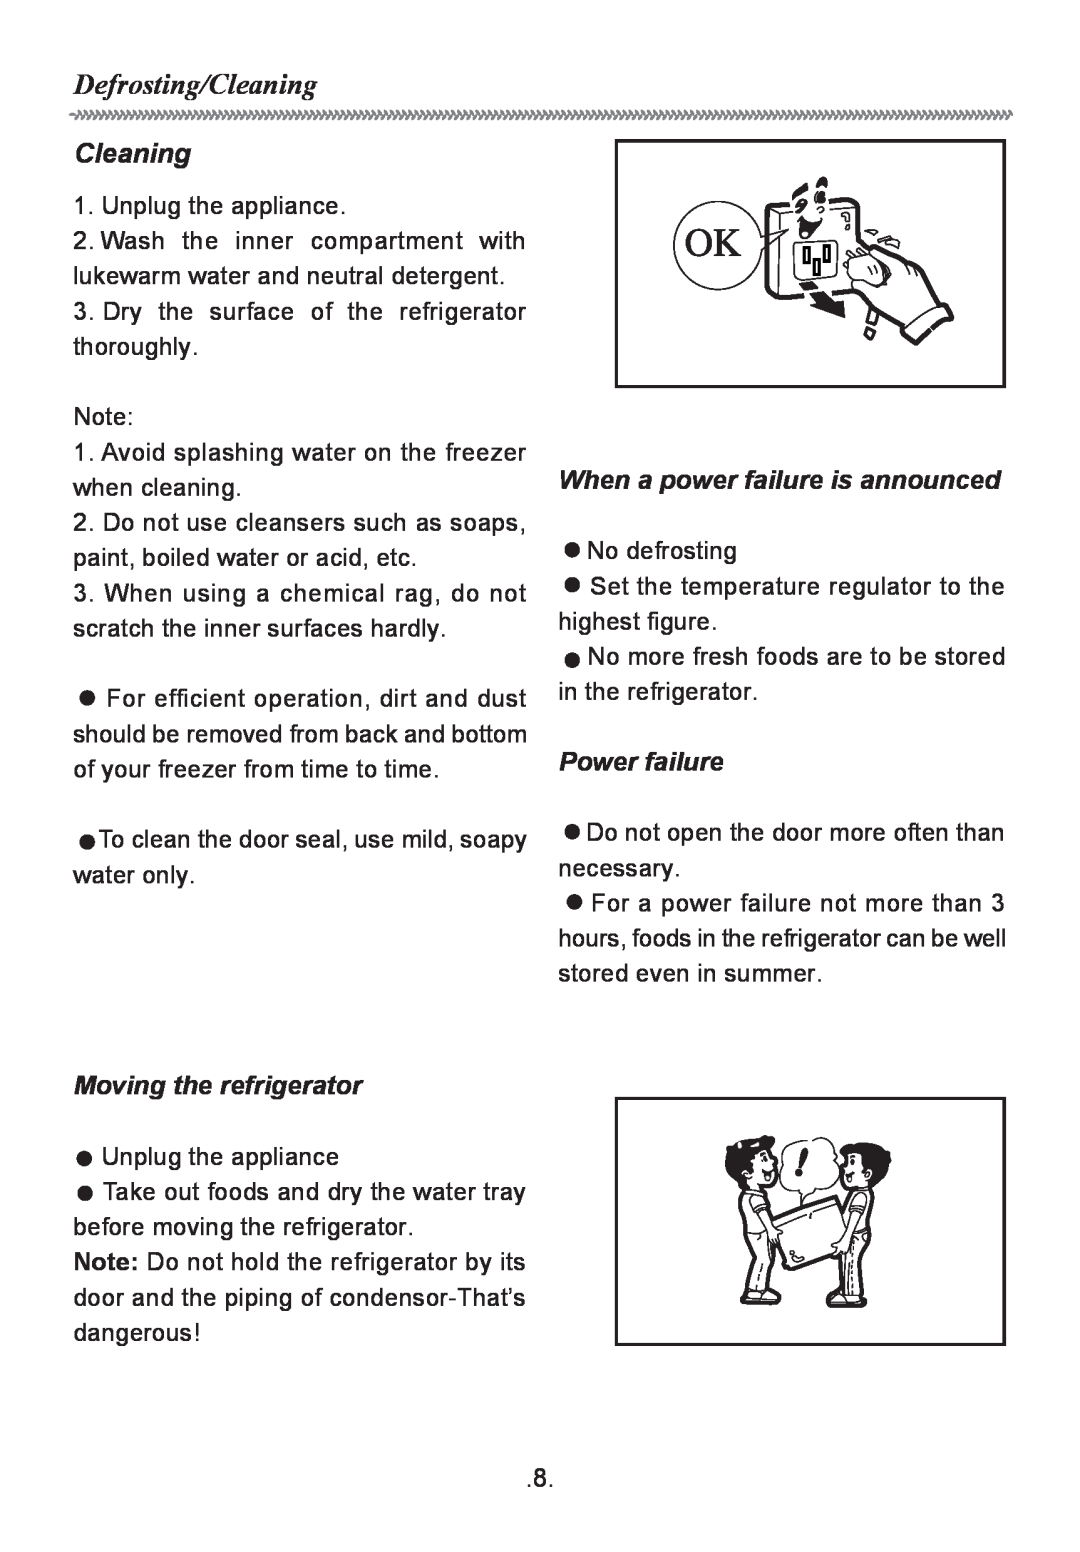 Haier HR-126WL manual When a power failure is announced, Power failure, Moving the refrigerator, Defrosting/Cleaning 